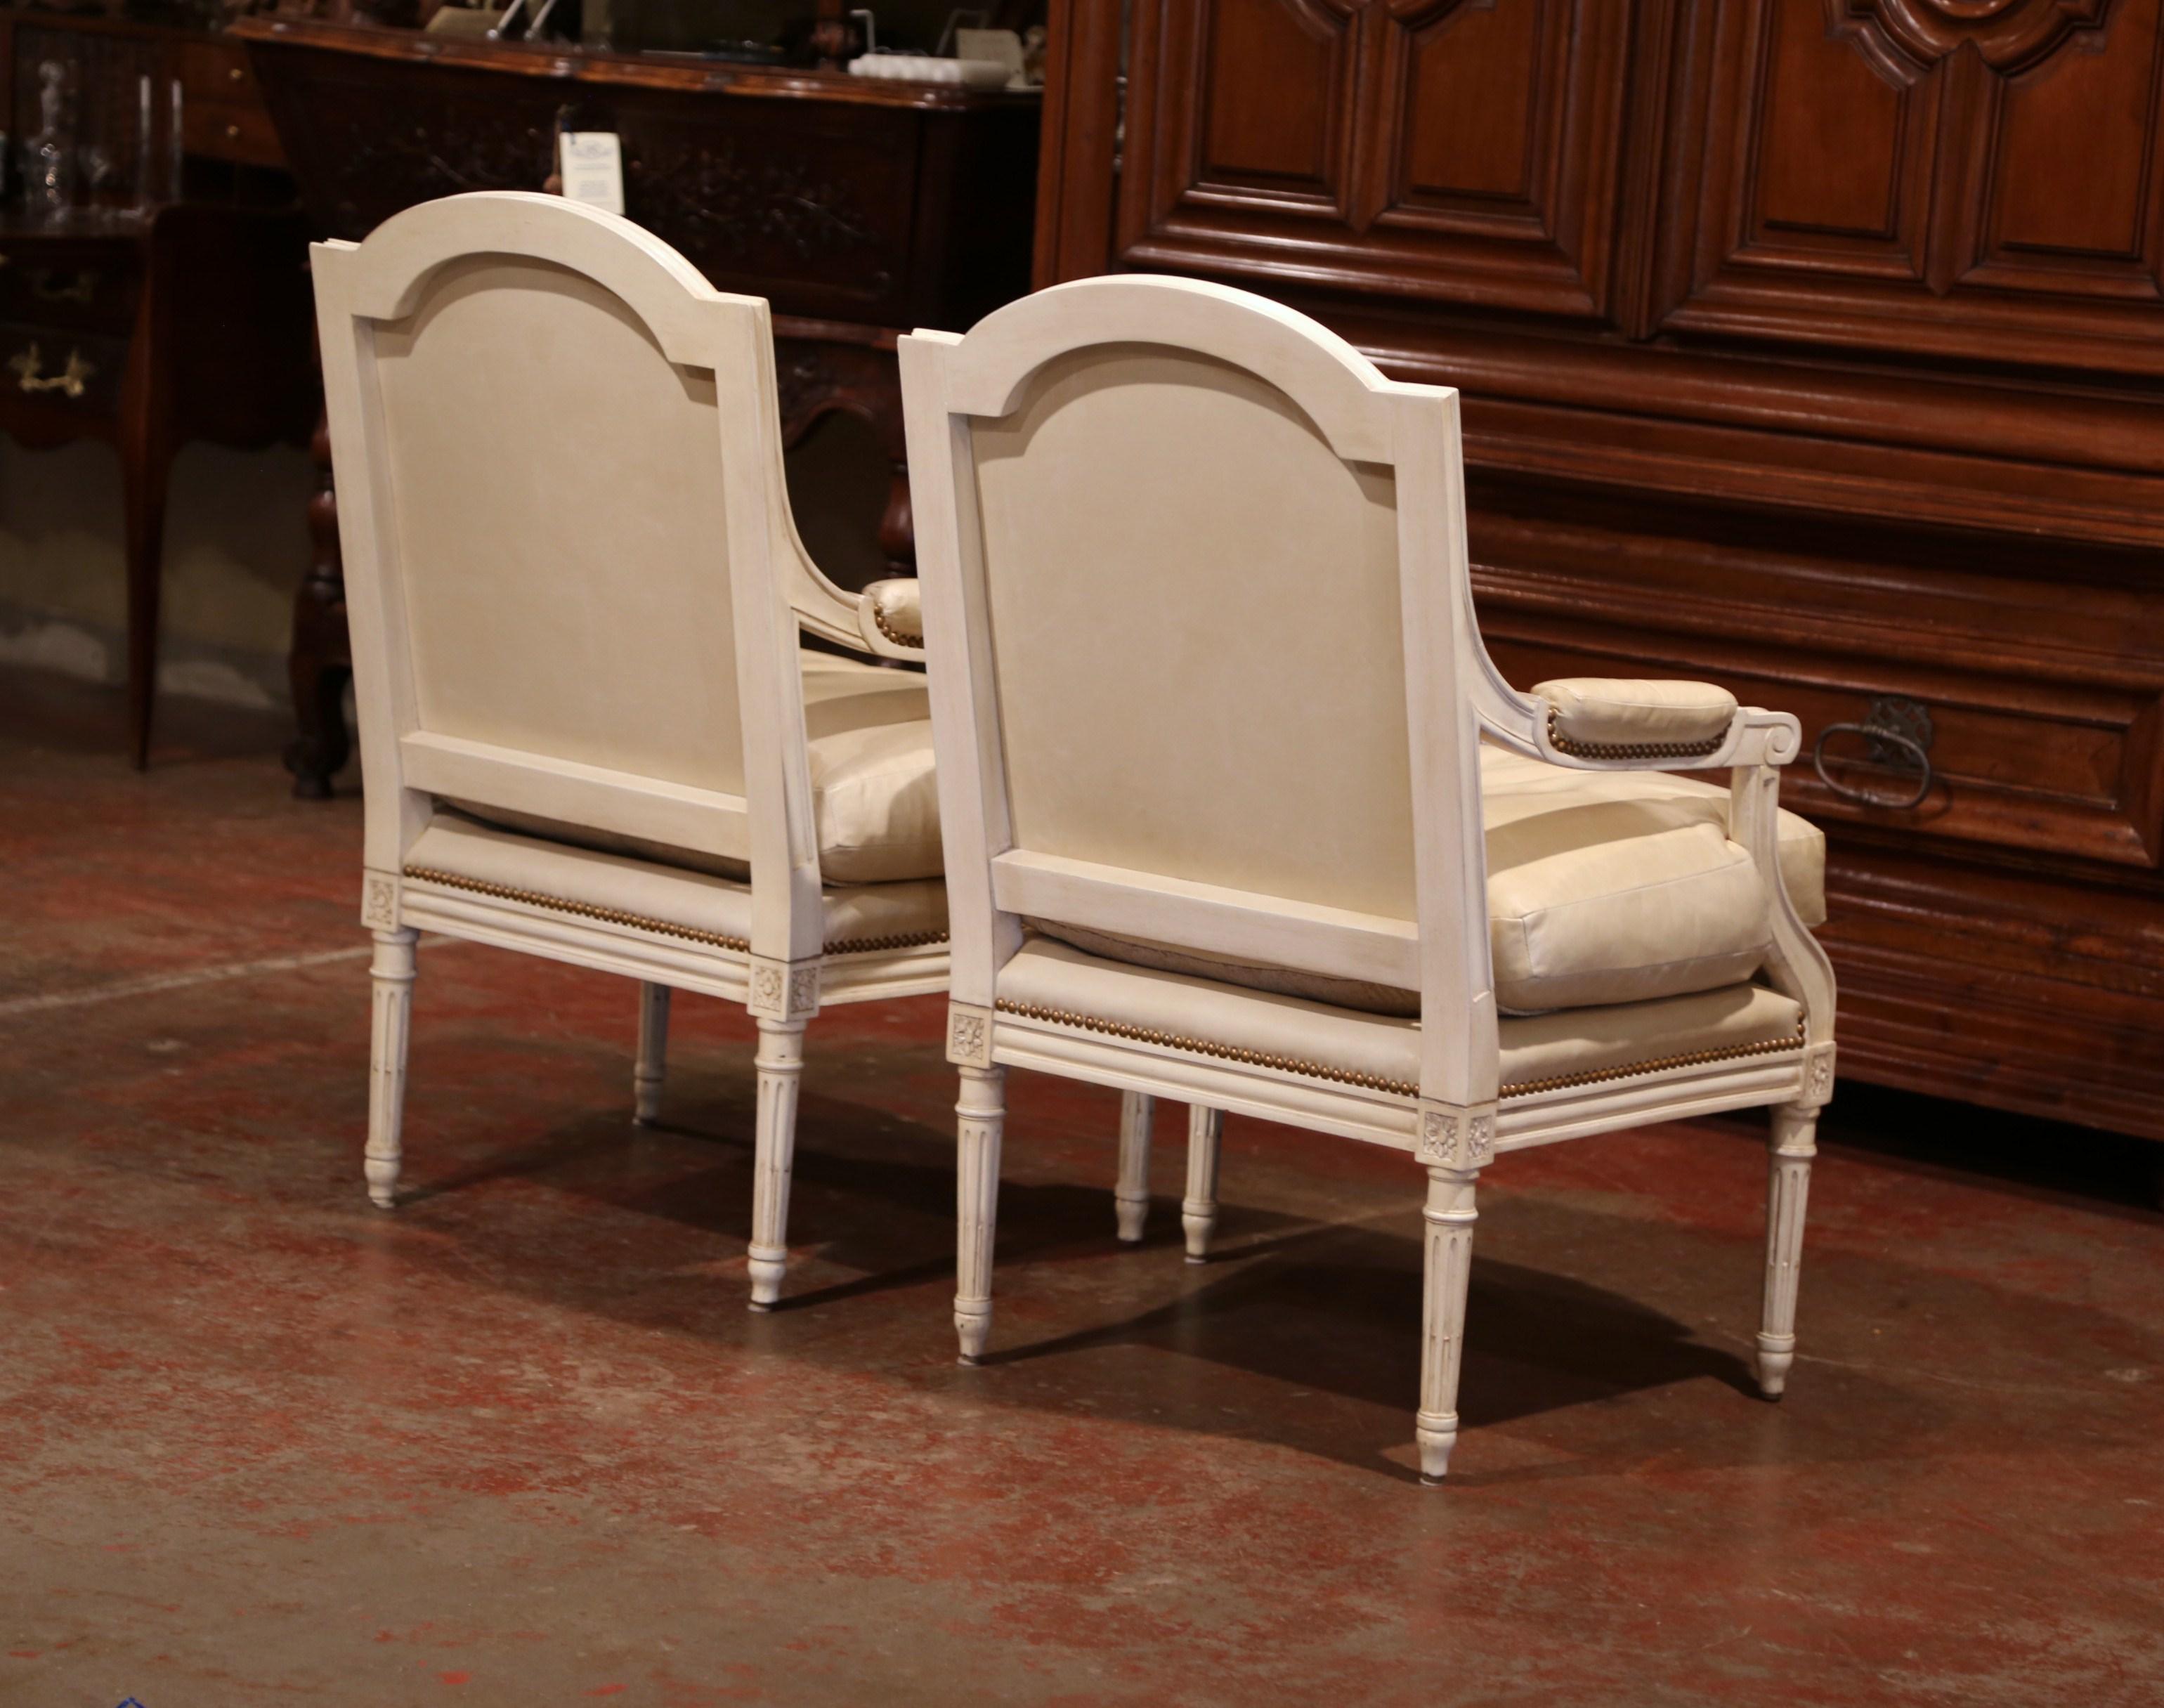 Pair of French Louis XVI Carved Painted Armchairs with Beige Leather Upholstery (Leder)